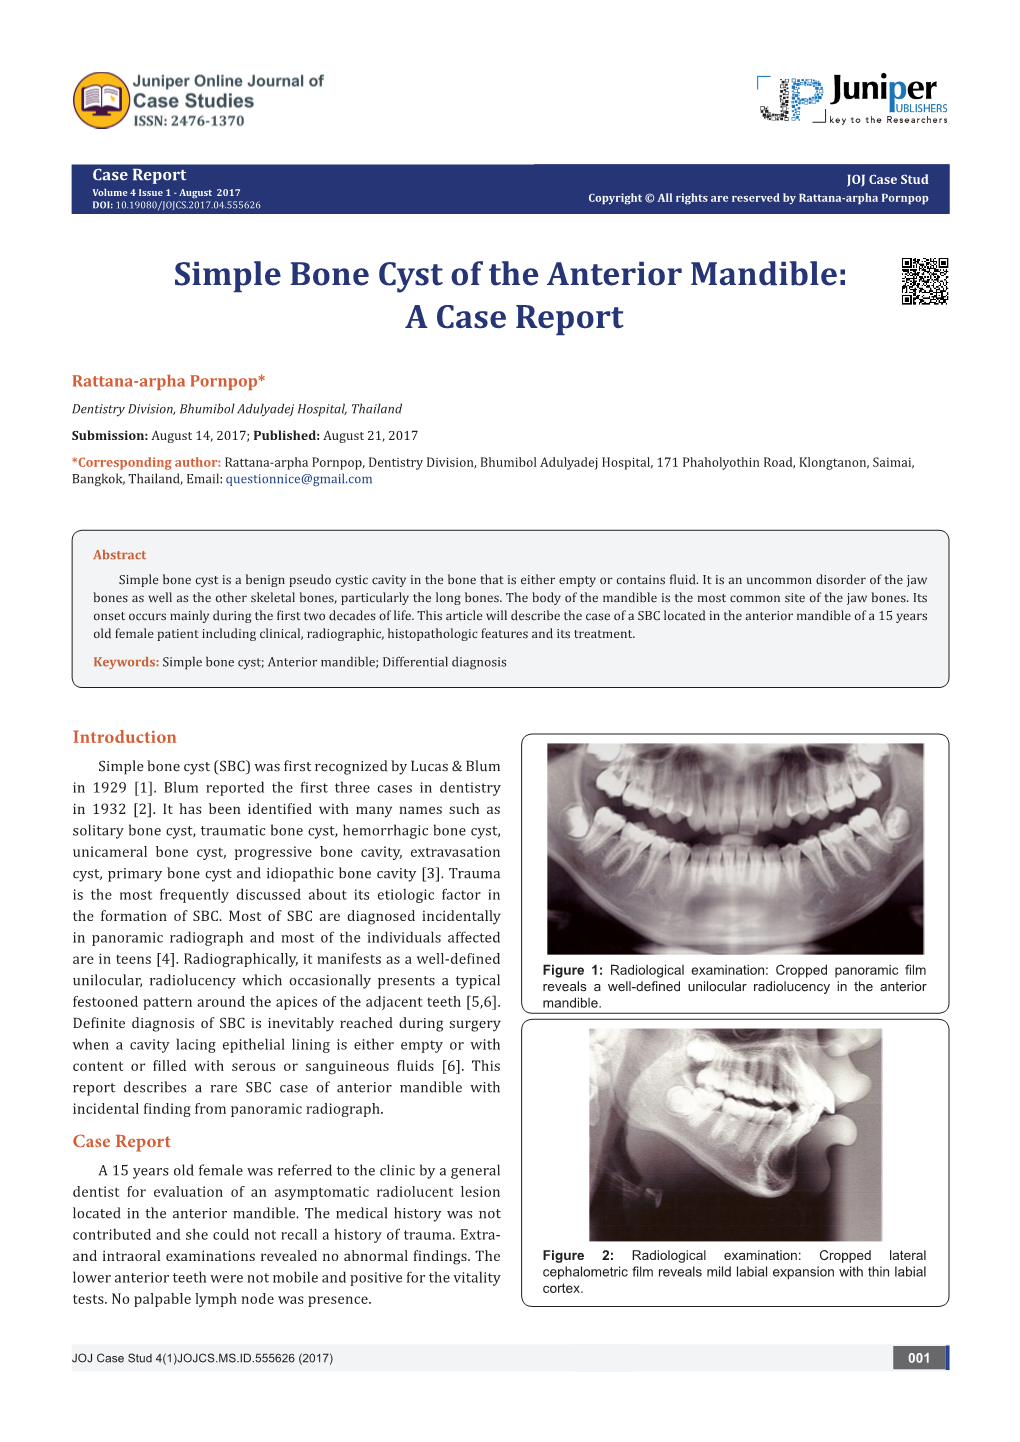 Simple Bone Cyst Of The Anterior Mandible A Case Report Docslib 6717